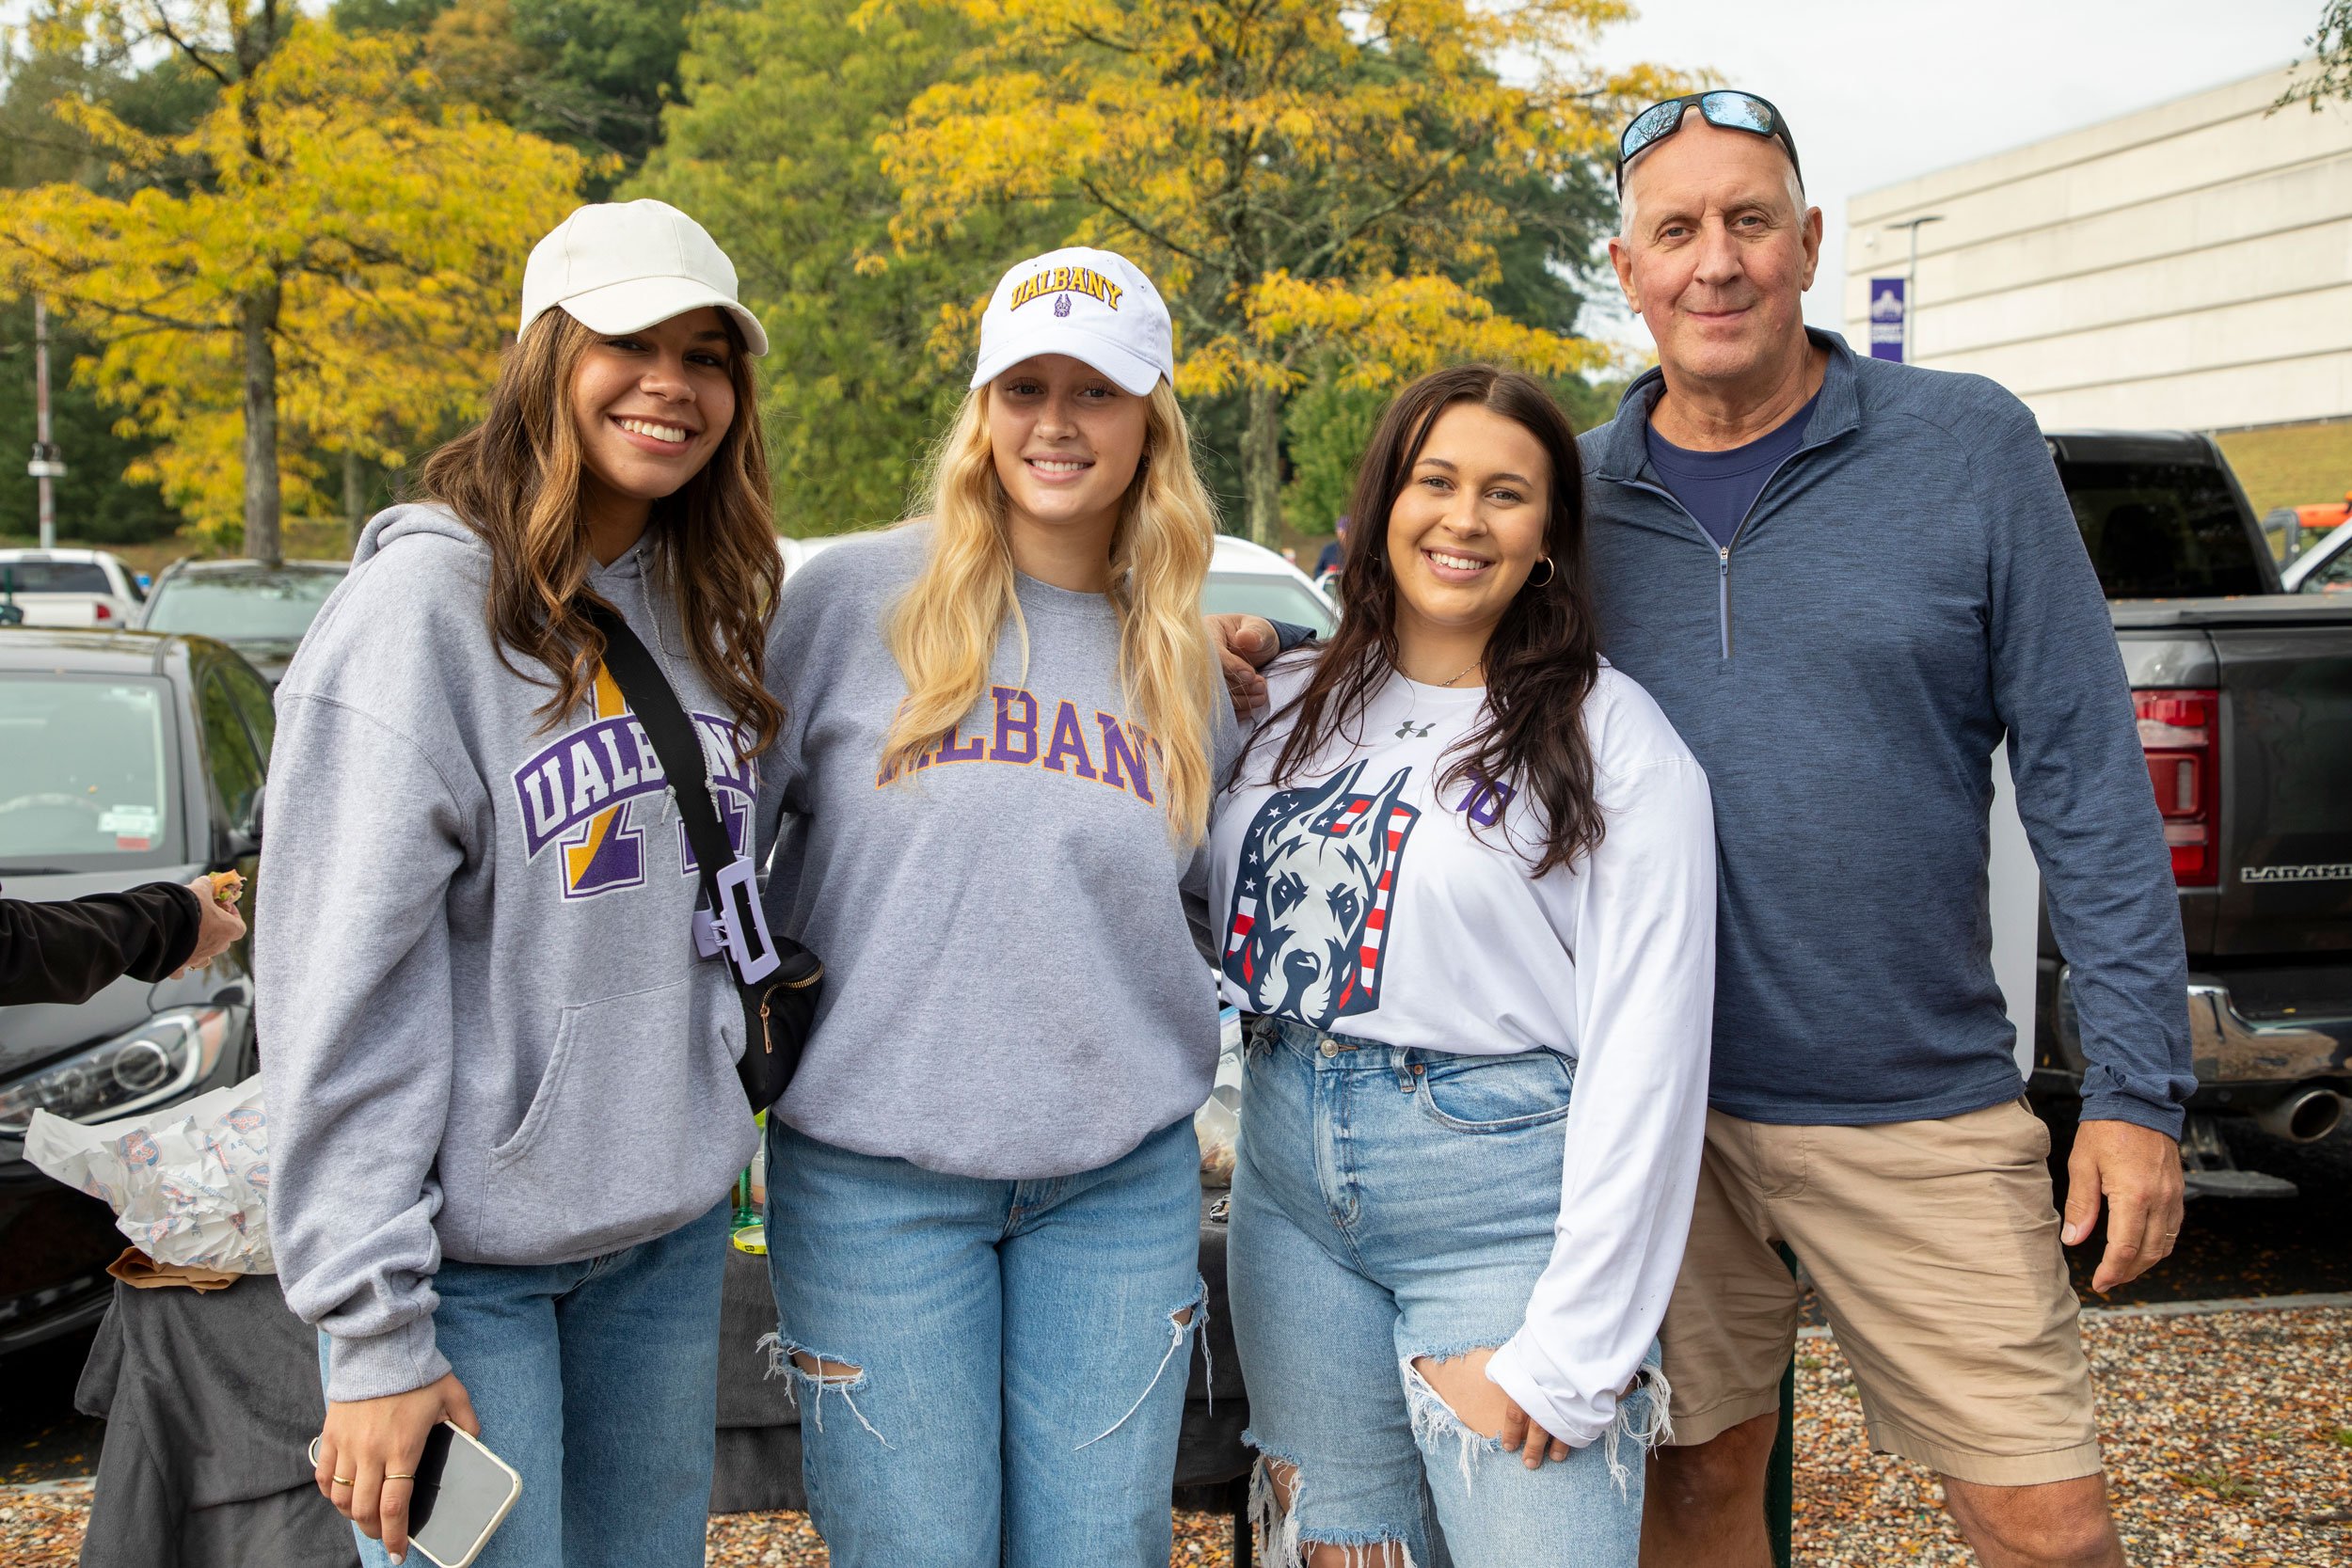 Four adults wearing UAlbany sweatshirts smile as they pose for a photo.